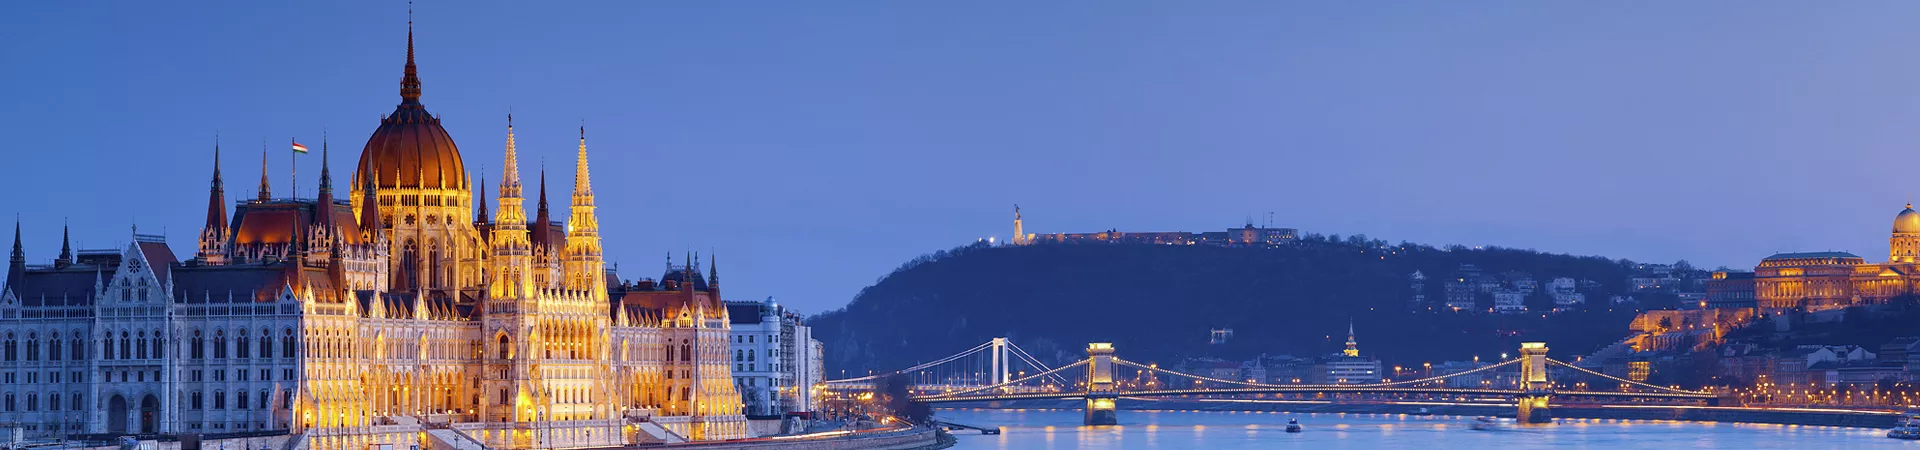 Hungary Luxury Tours and Travel Guide